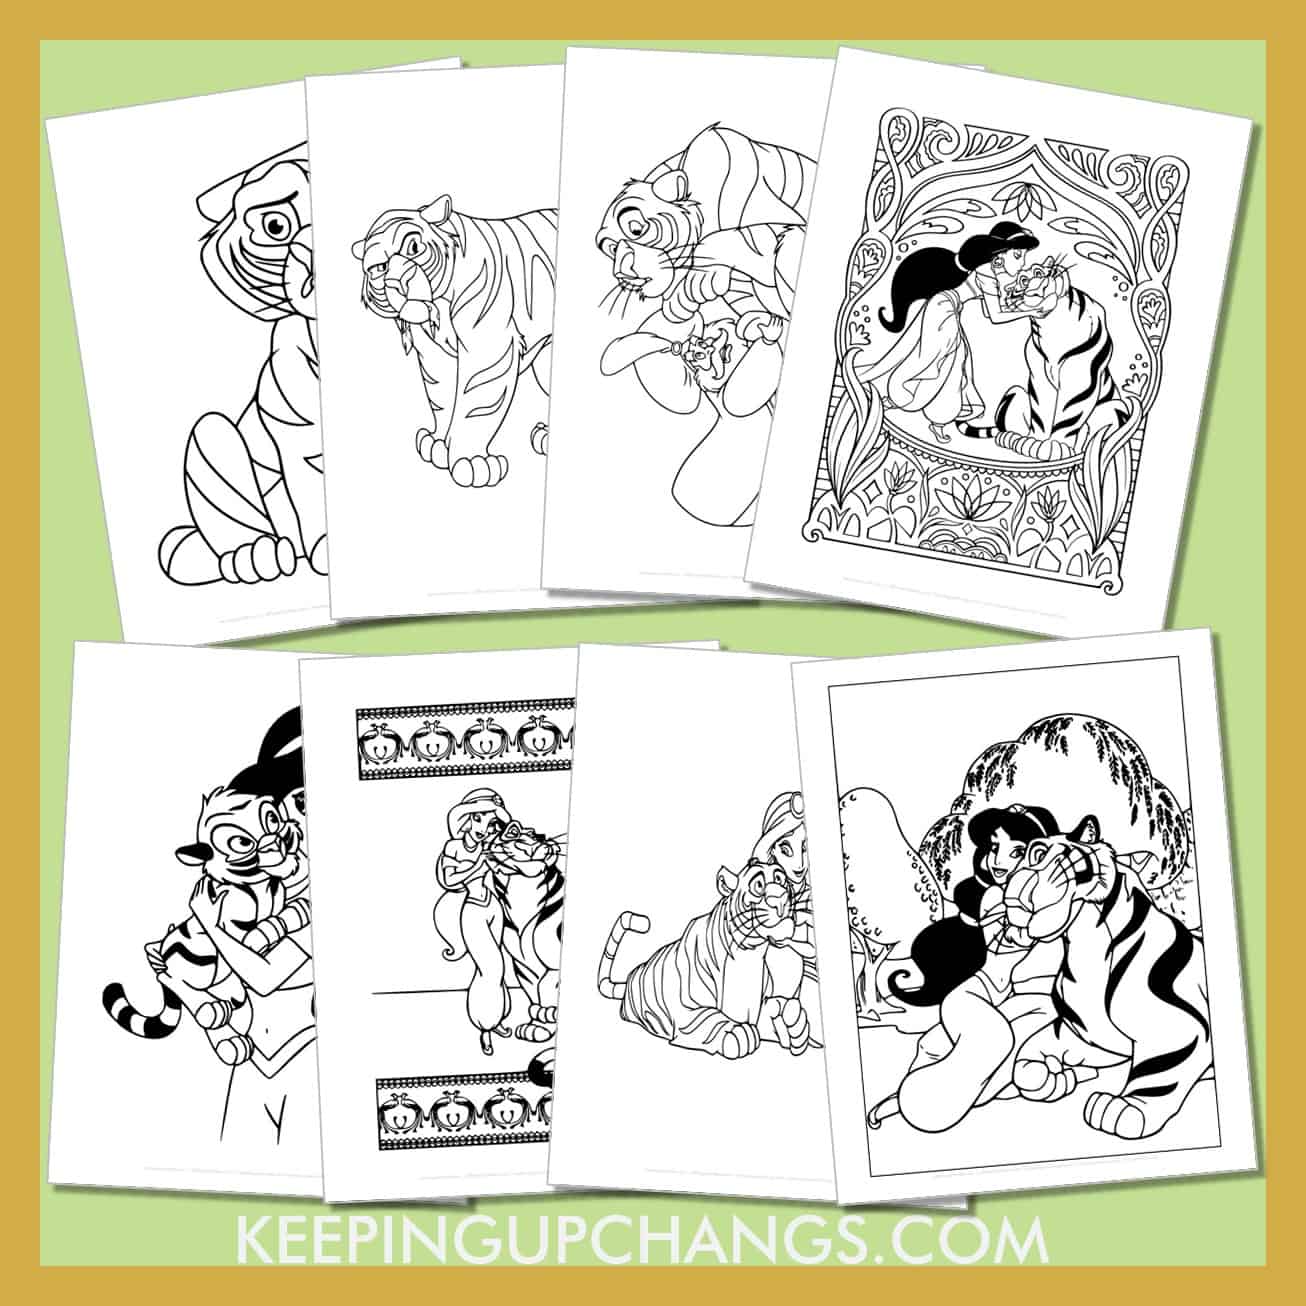 free rajah pictures to color for toddlers, kids, adults.